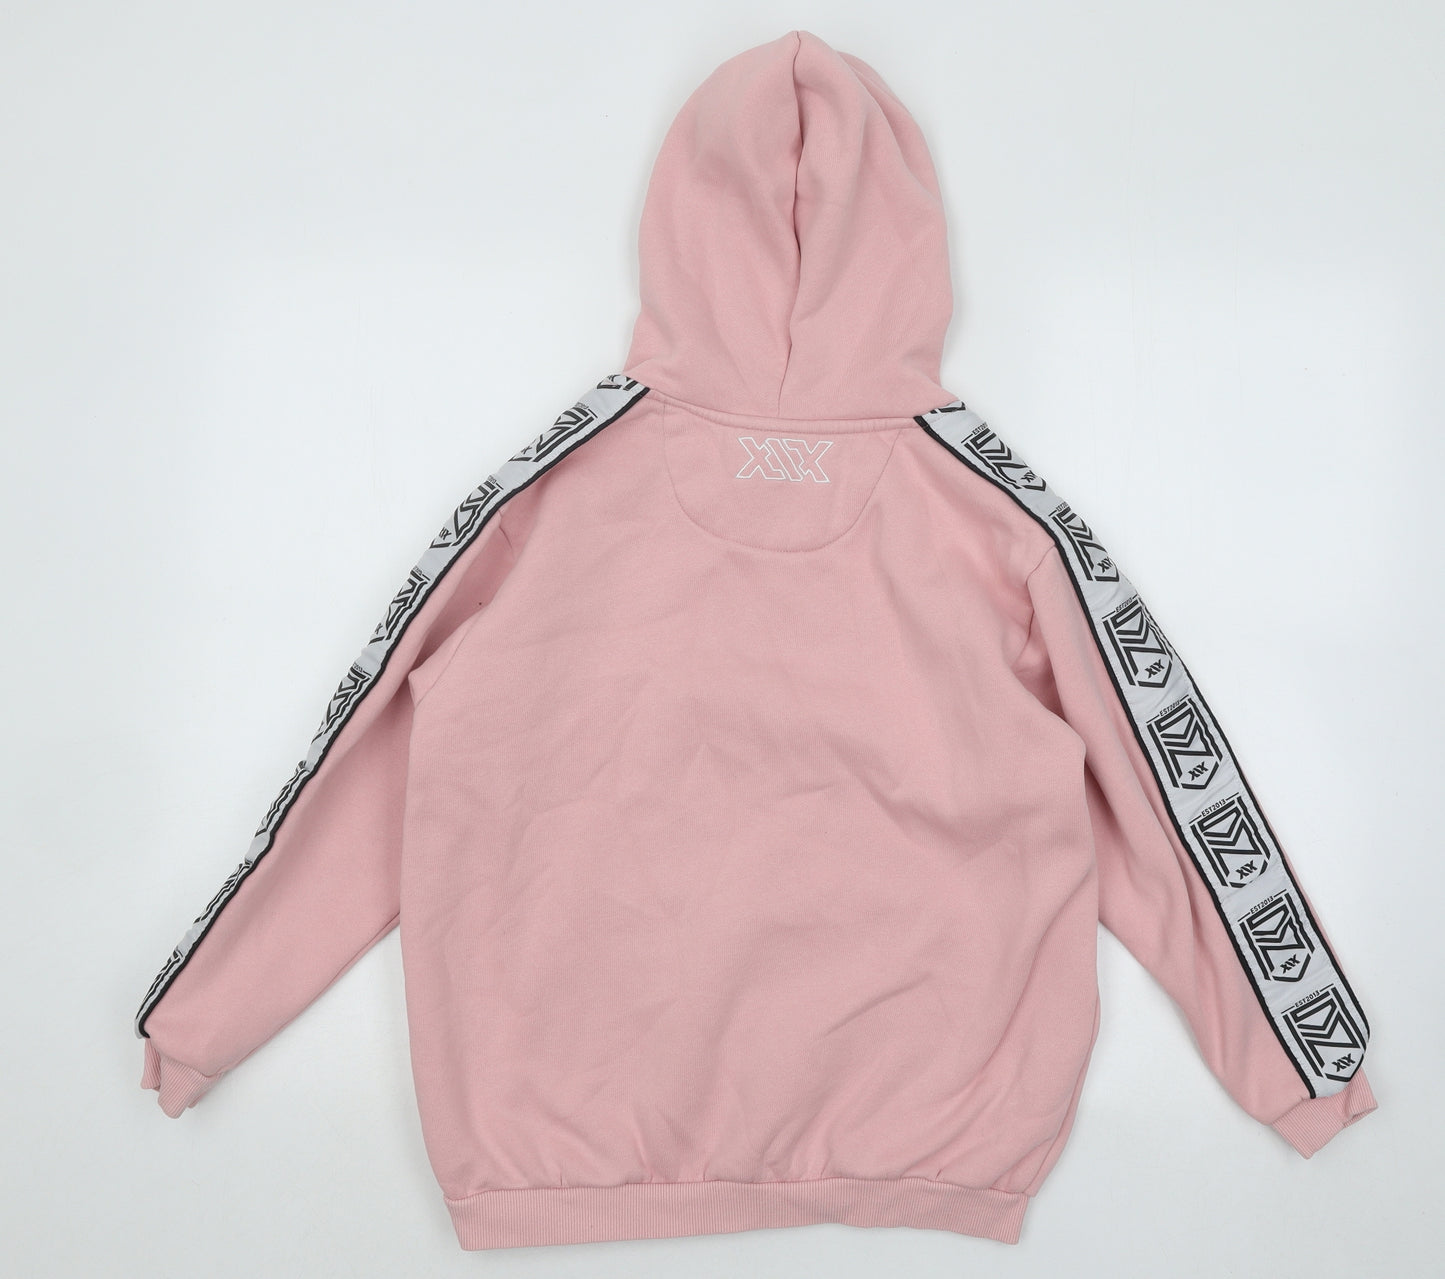 Sidemen Girls Pink Cotton Pullover Hoodie Size 11-12 Years Pullover